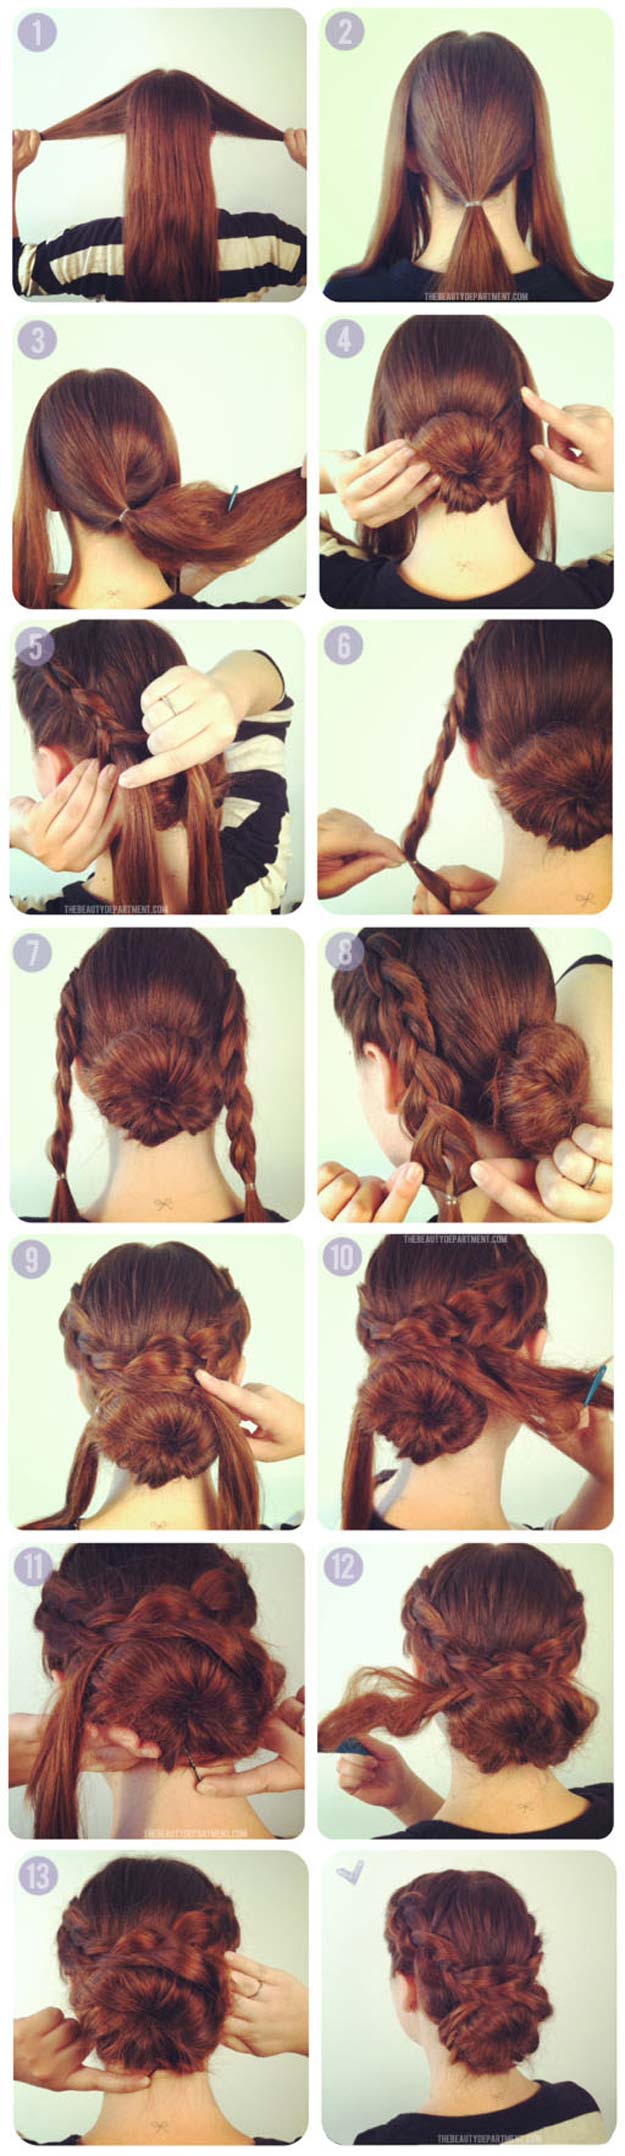 Best Hairstyles for Long Hair - Hot Crossed Bun - Step by Step Tutorials for Easy Curls, Updo, Half Up, Braids and Lazy Girl Looks. Prom Ideas, Special Occasion Hair and Braiding Instructions for Teens, Teenagers and Adults, Women and Girls 